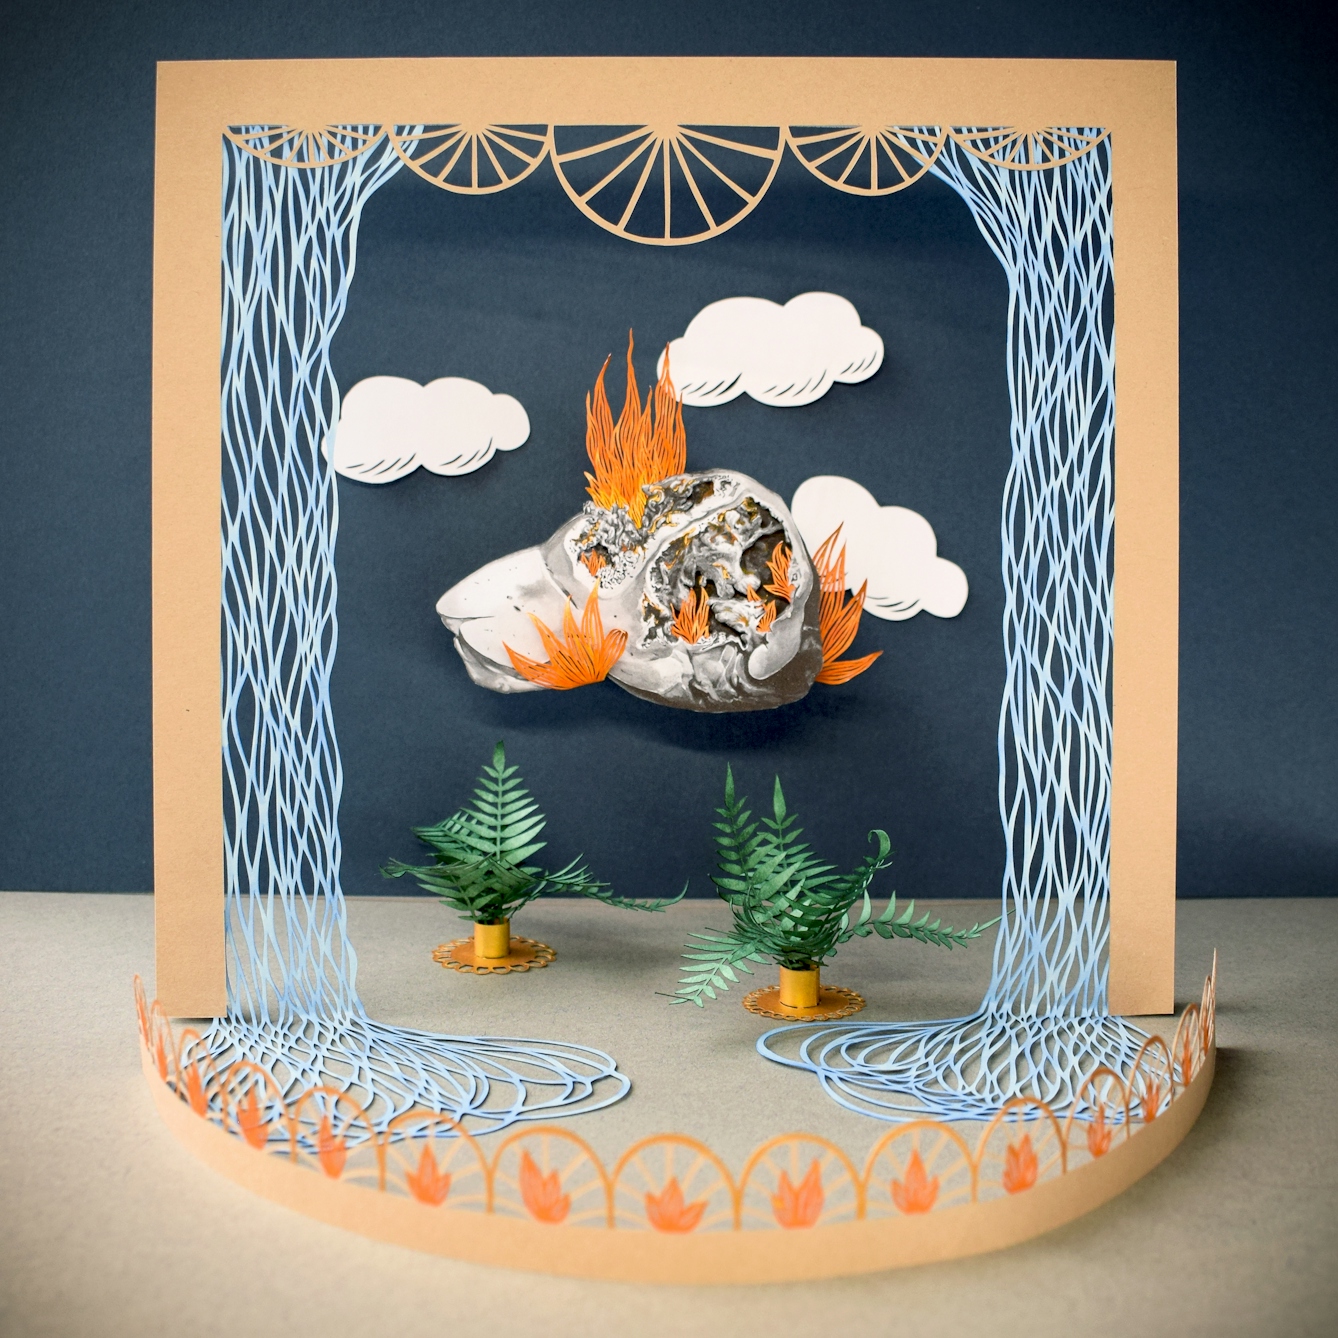 Colourful papercut artwork with many separate elements on different levels creating a scene with depth, perspective and shadows. The scene shows a theatrical looking orange toned set with a stage front and curtain-like frame. Within stage there are 2 fern plants in pots on the floor and hanging from the blue backdrop are white clouds and  a monotone drawing of the human liver which appears to have flames emanating from it.